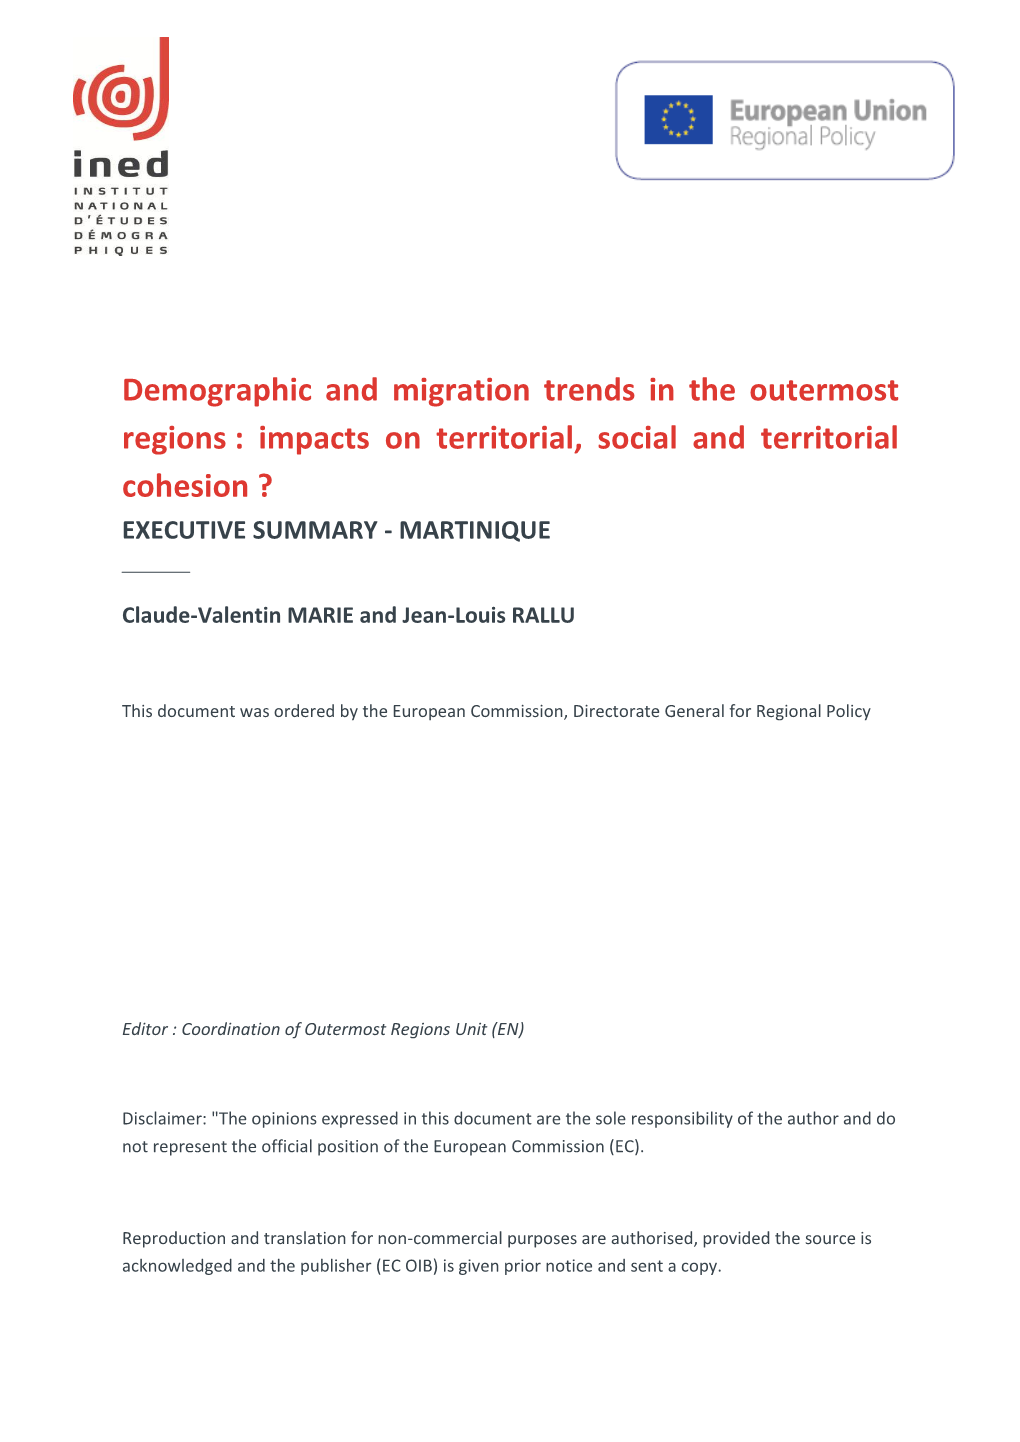 Demographic and Migration Trends in the Outermost Regions : Impacts on Territorial, Social and Territorial Cohesion ? EXECUTIVE SUMMARY - MARTINIQUE